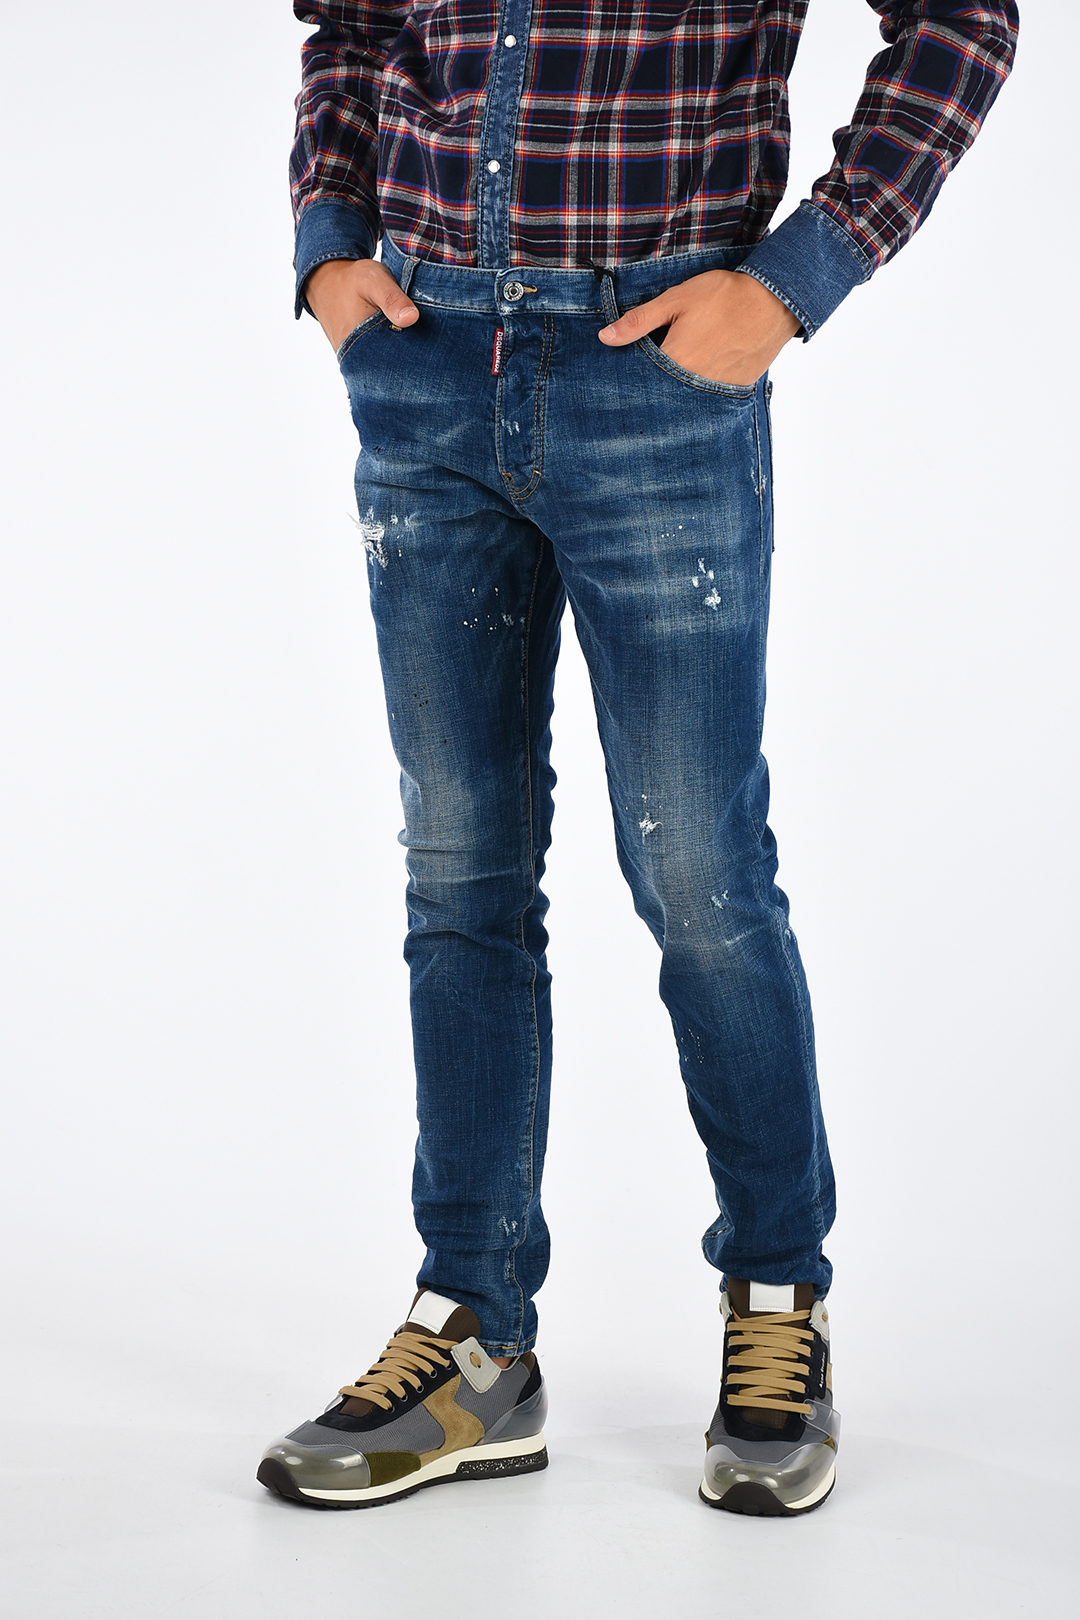 dsquared cool guy jeans